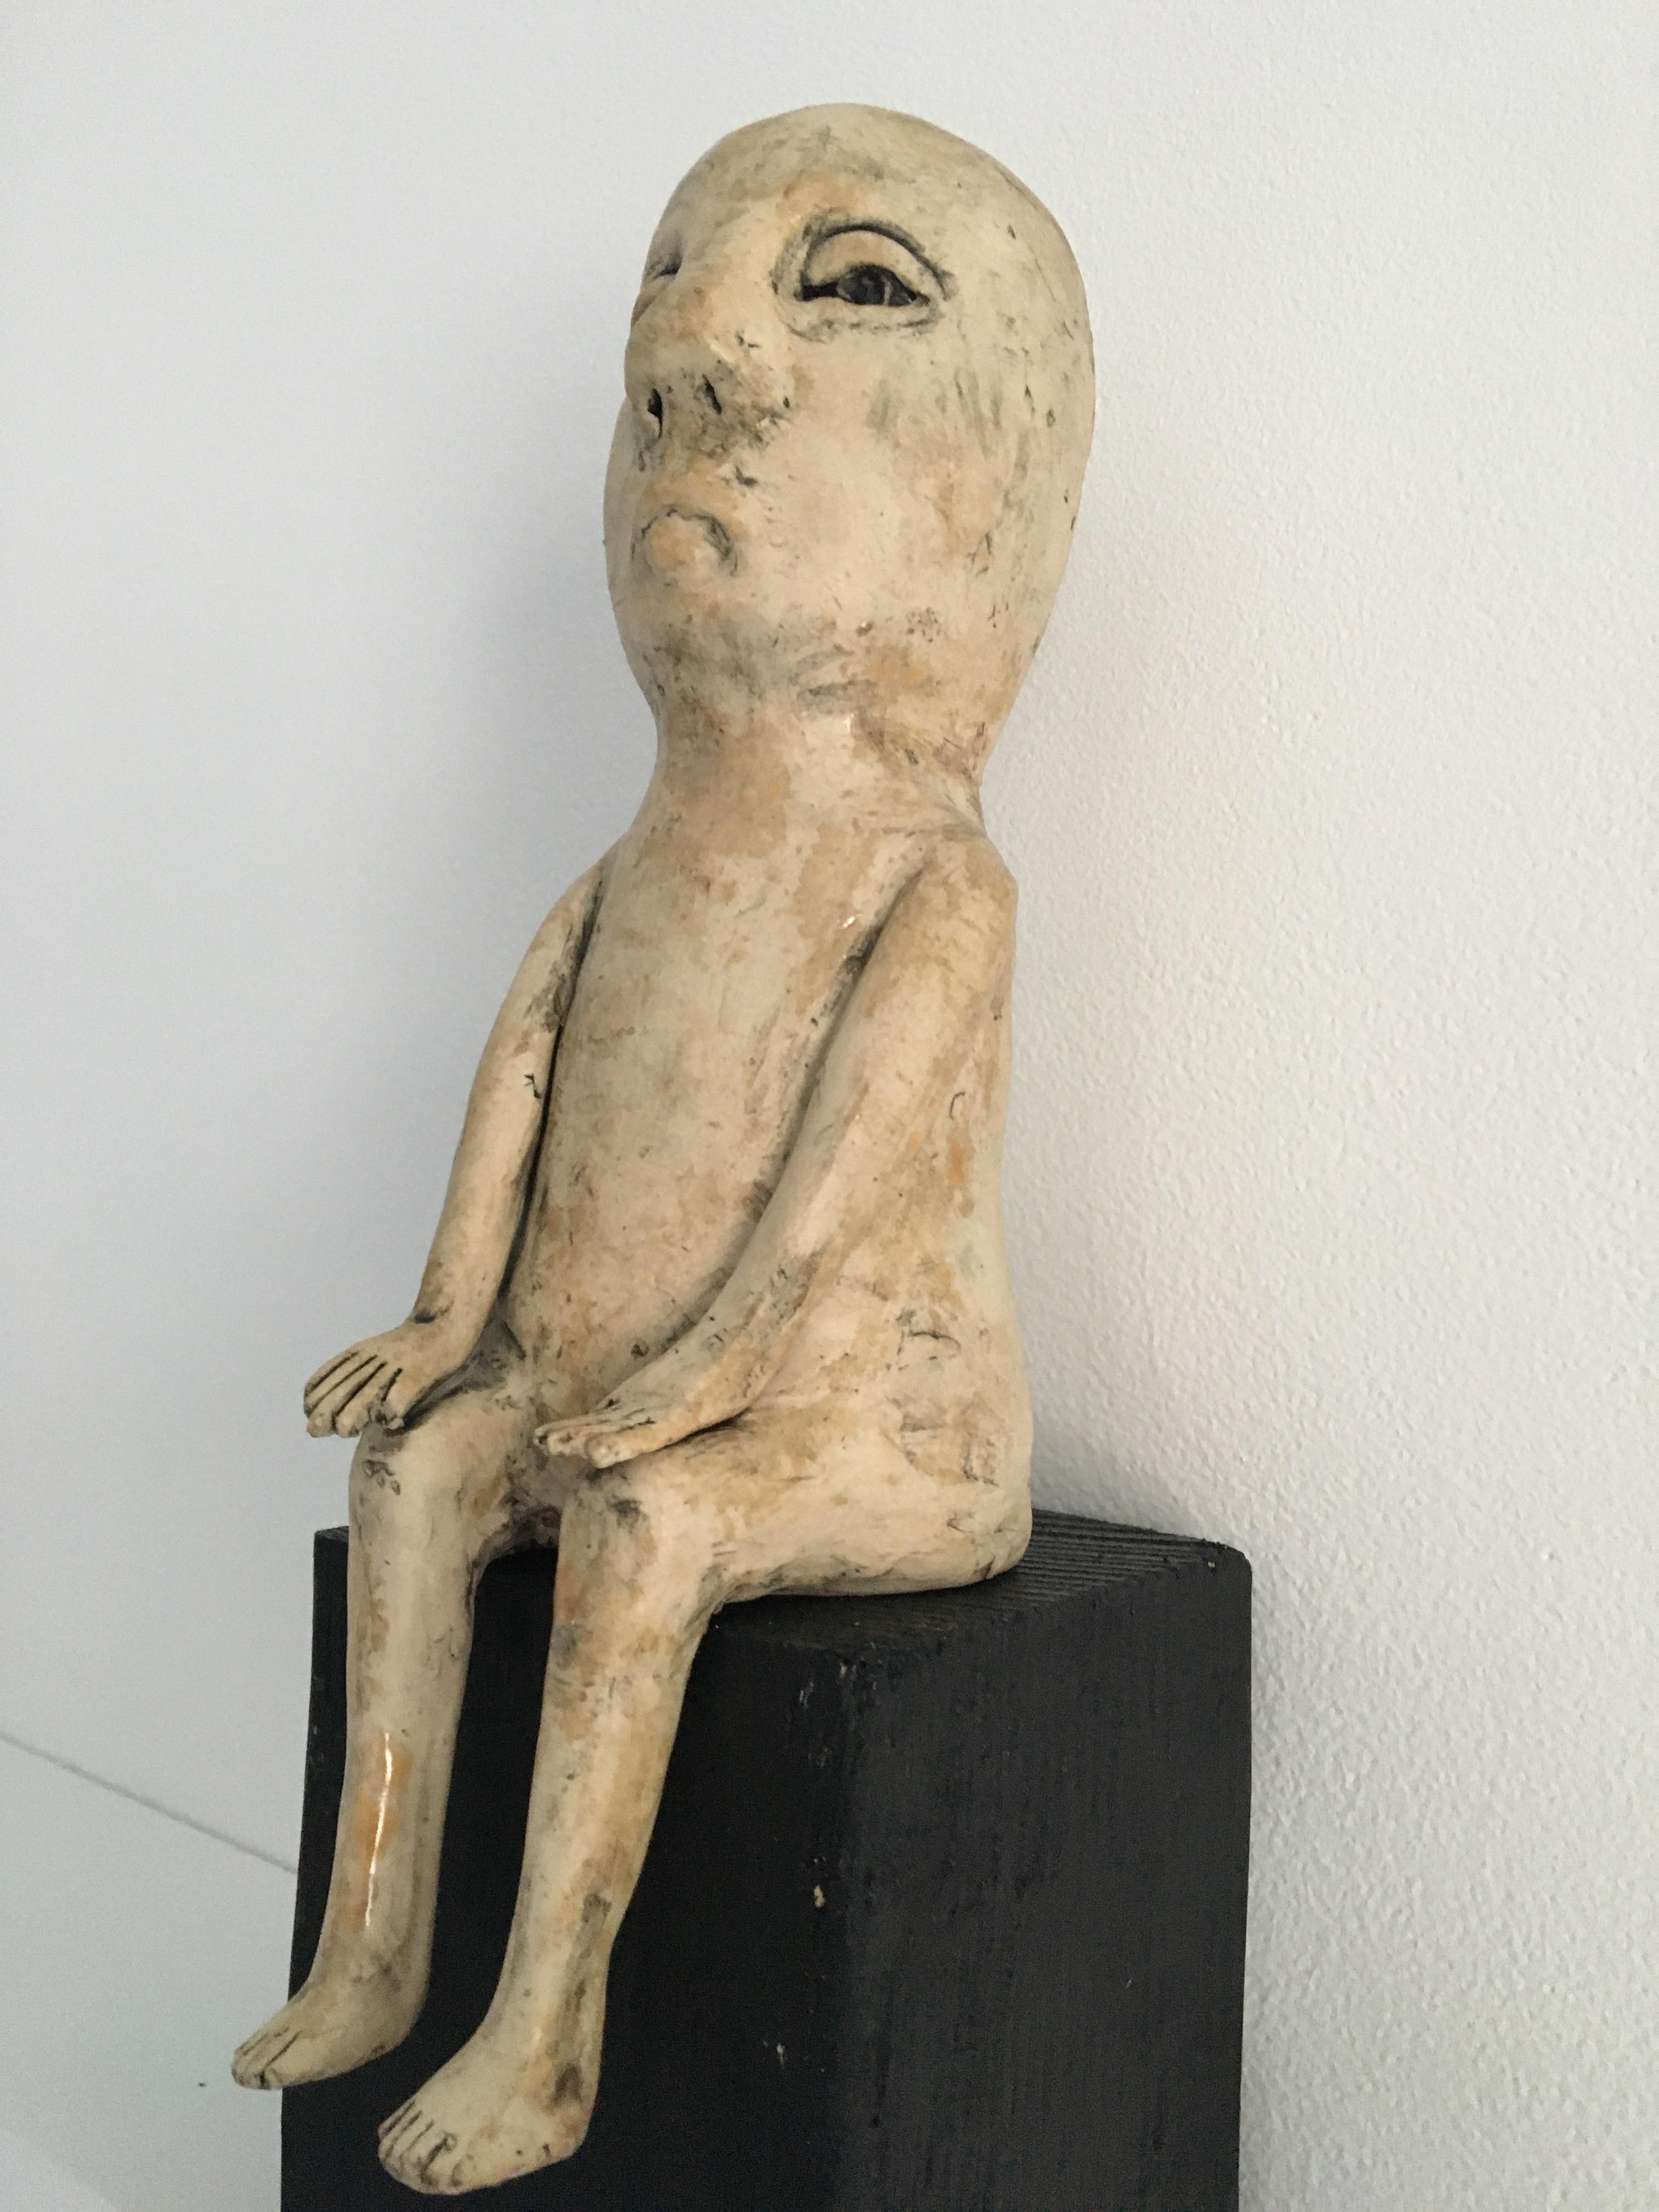 Ceramic figure on wood block: 'Enough of this' - Contemporary Sculpture by Ashley Benton